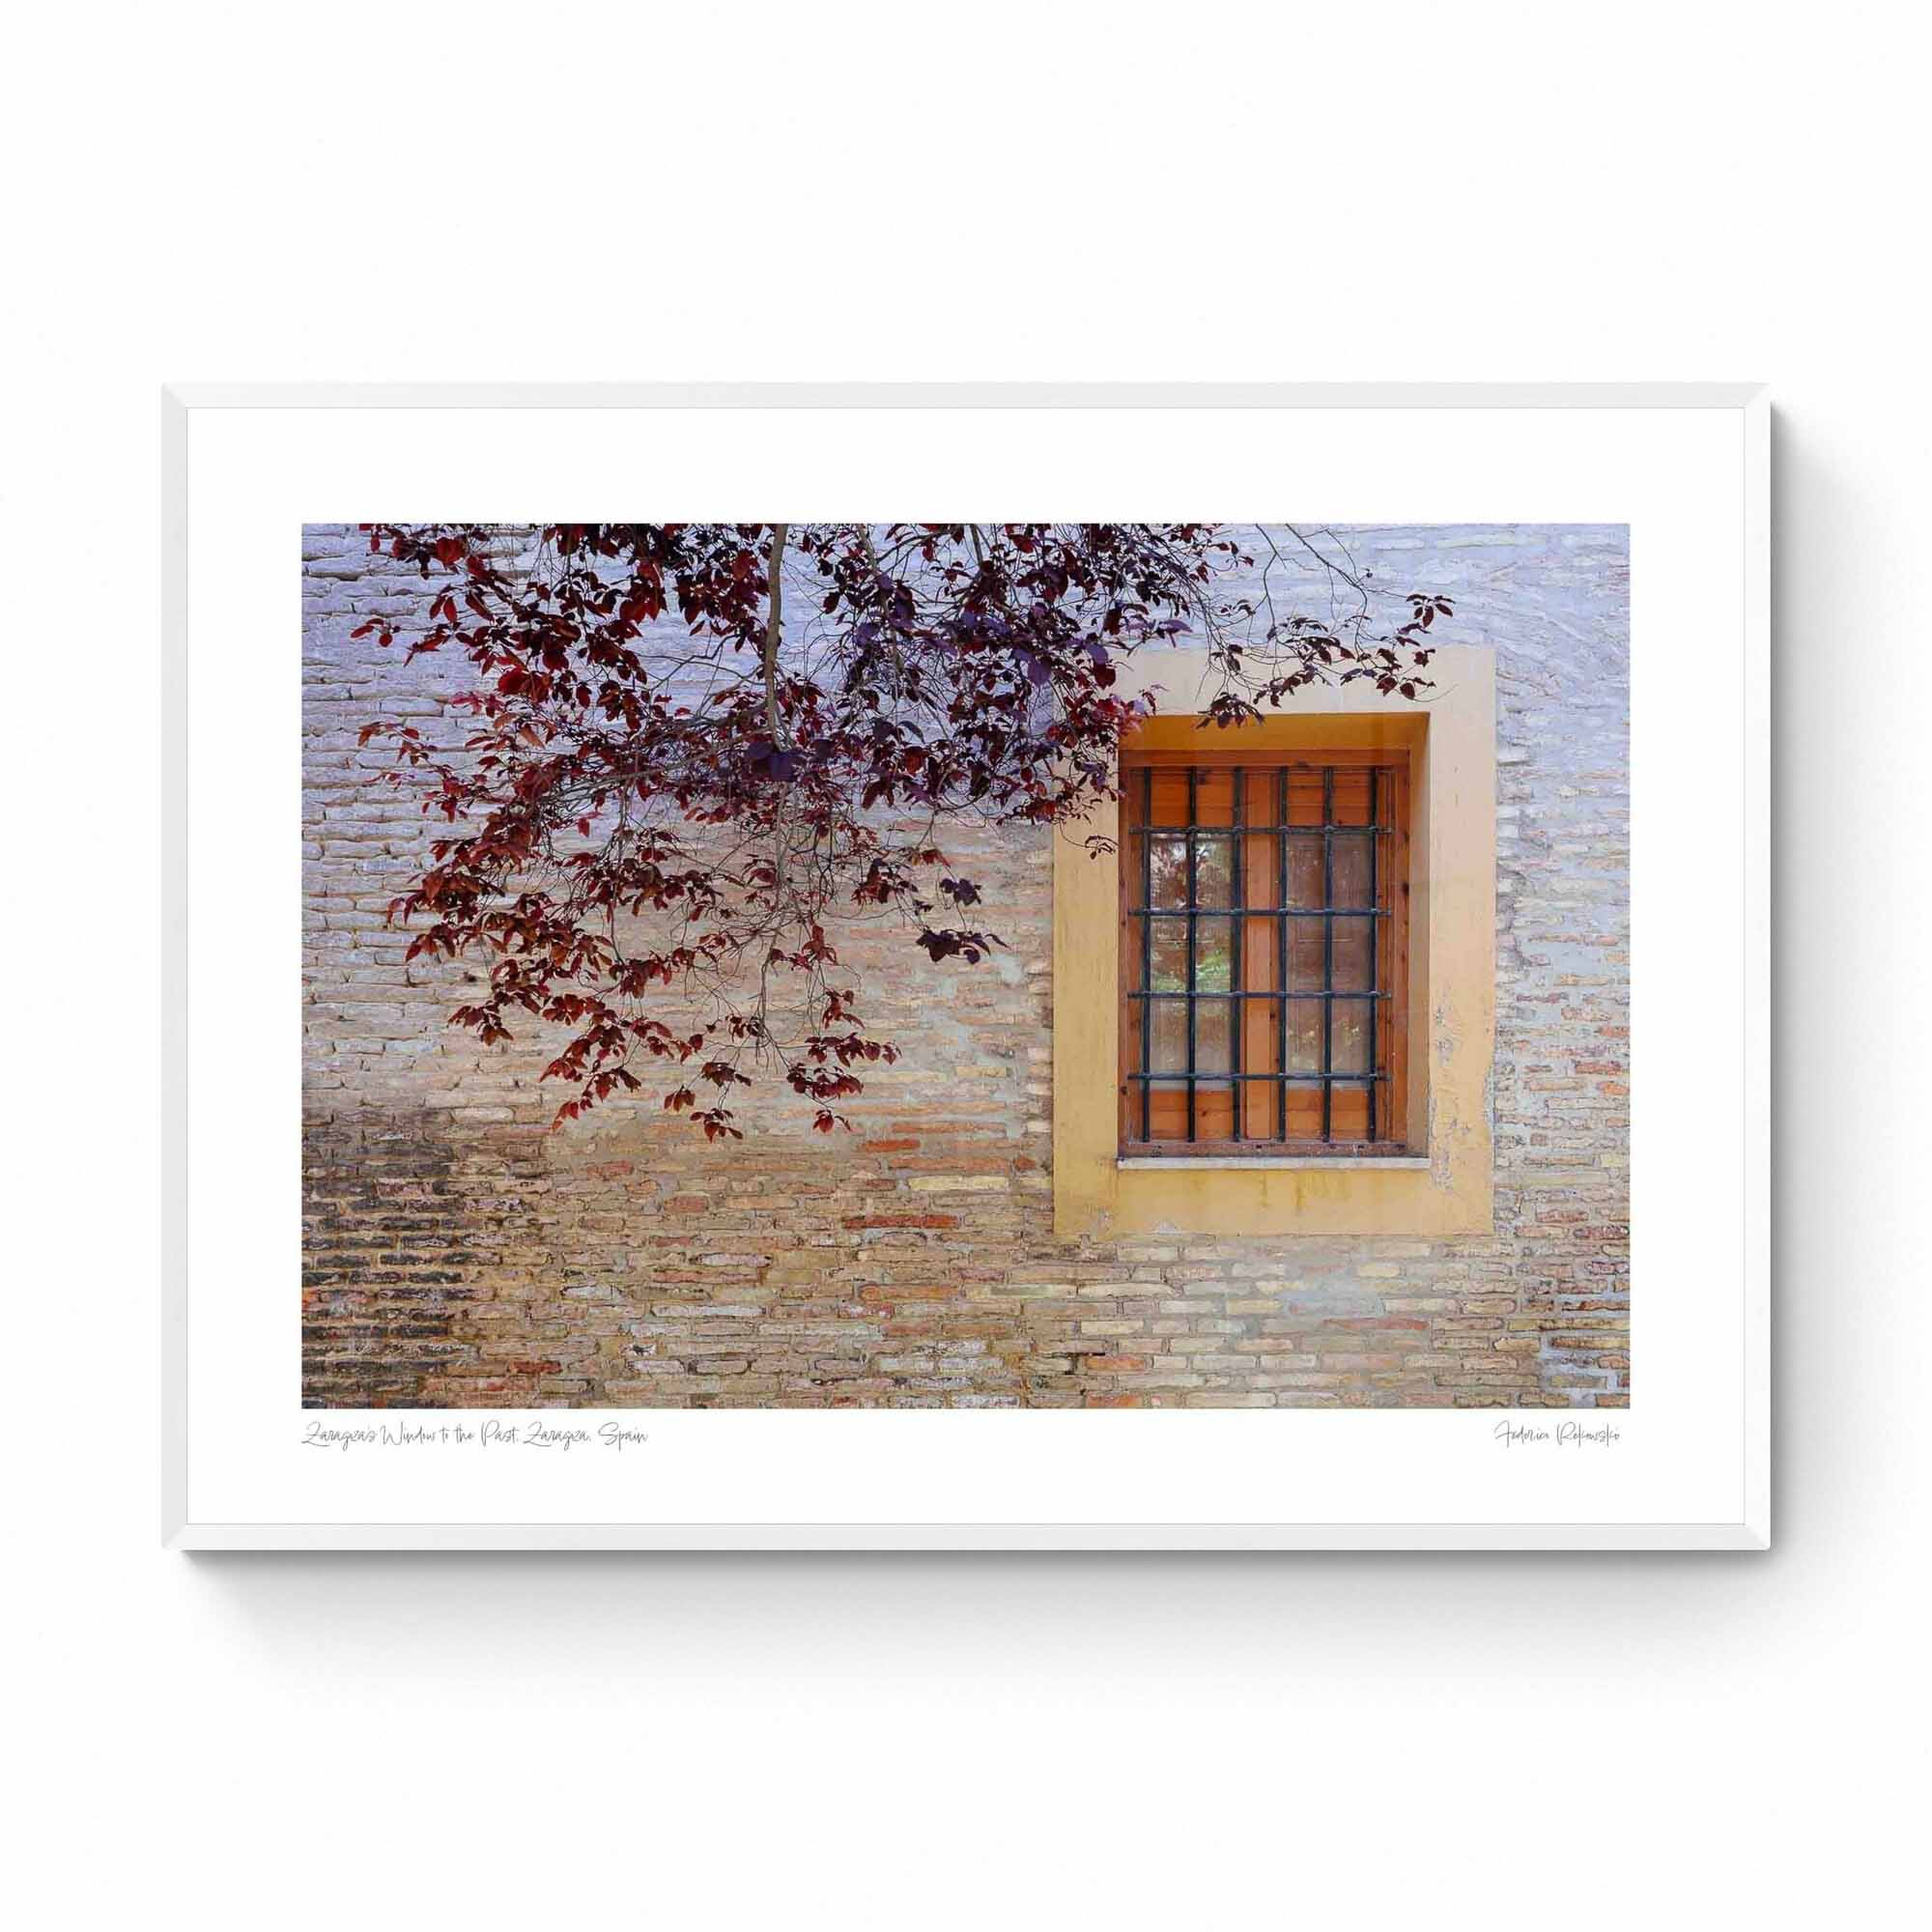 A rustic window with a yellow frame set in an old brick wall, adorned by autumn leaves, in Zaragoza, Spain.